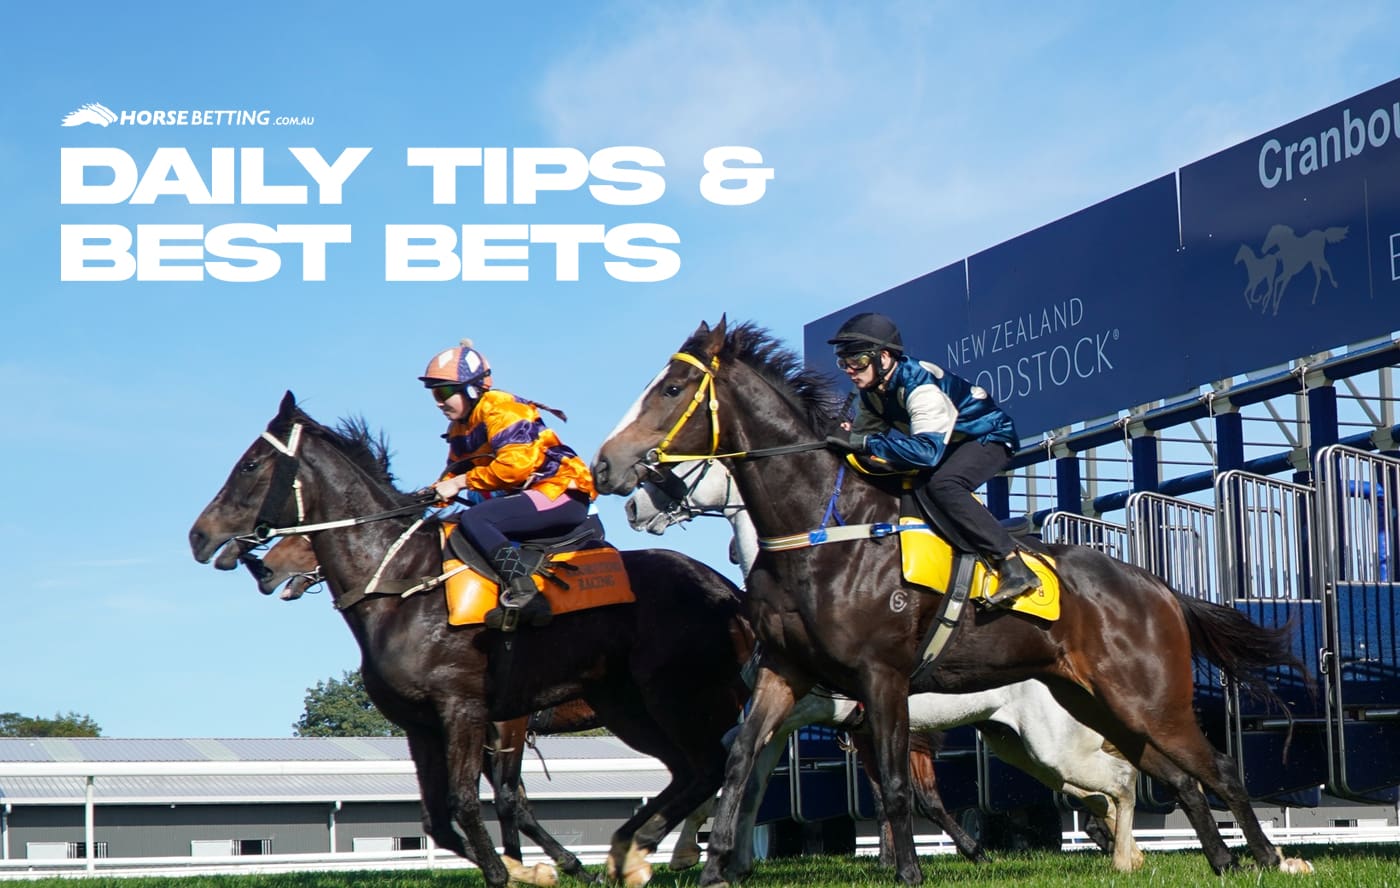 Cranbourne free horse racing betting tips